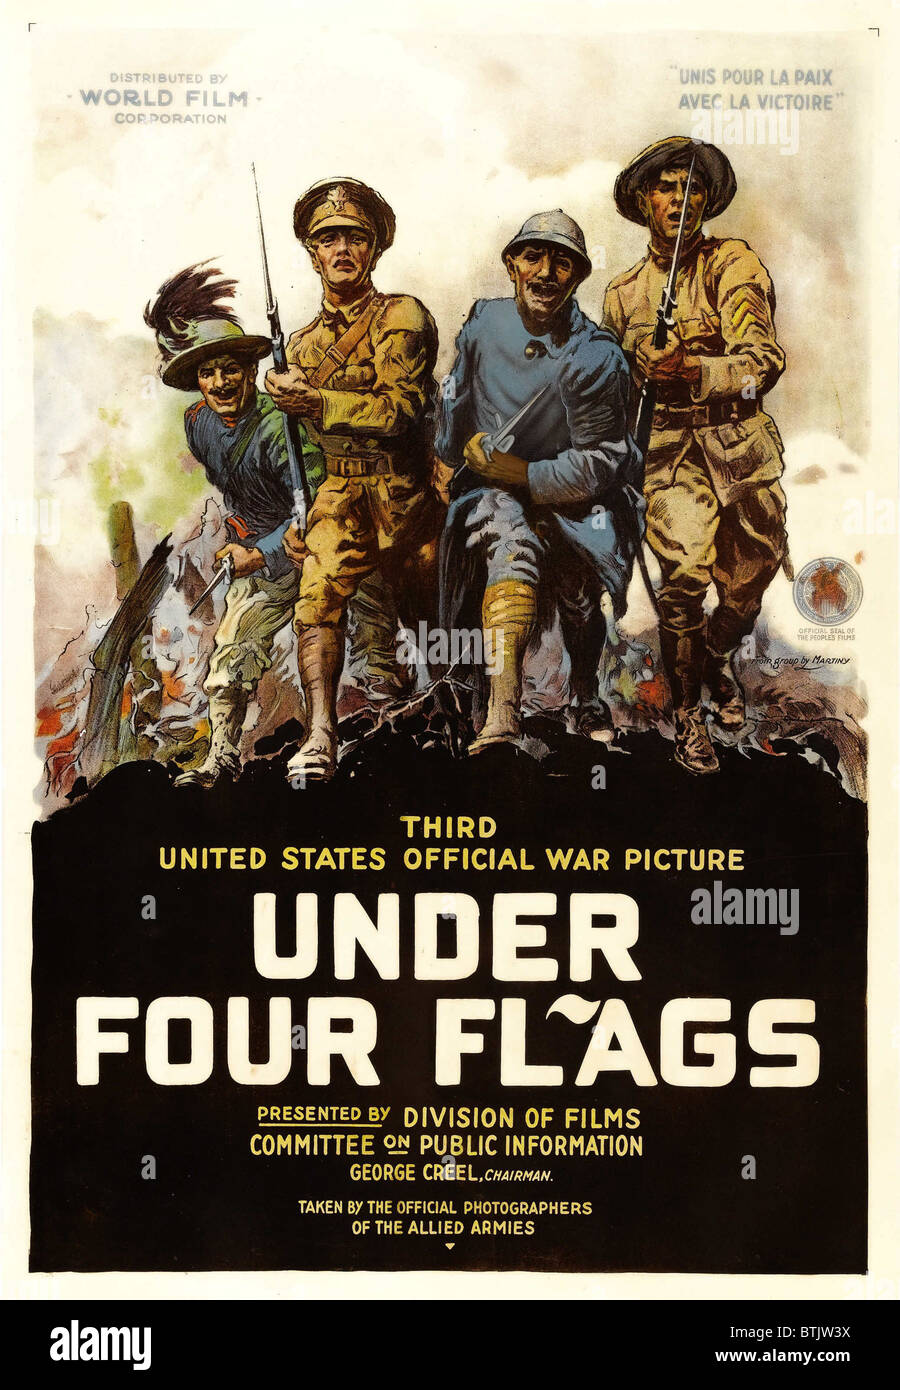 hane Bourgeon hestekræfter World War I movie poster for "Under Four Flags," showing four fighting  soldiers, one from each allied country, 1917. The government film was part  of George Creel's campaign to bui d public